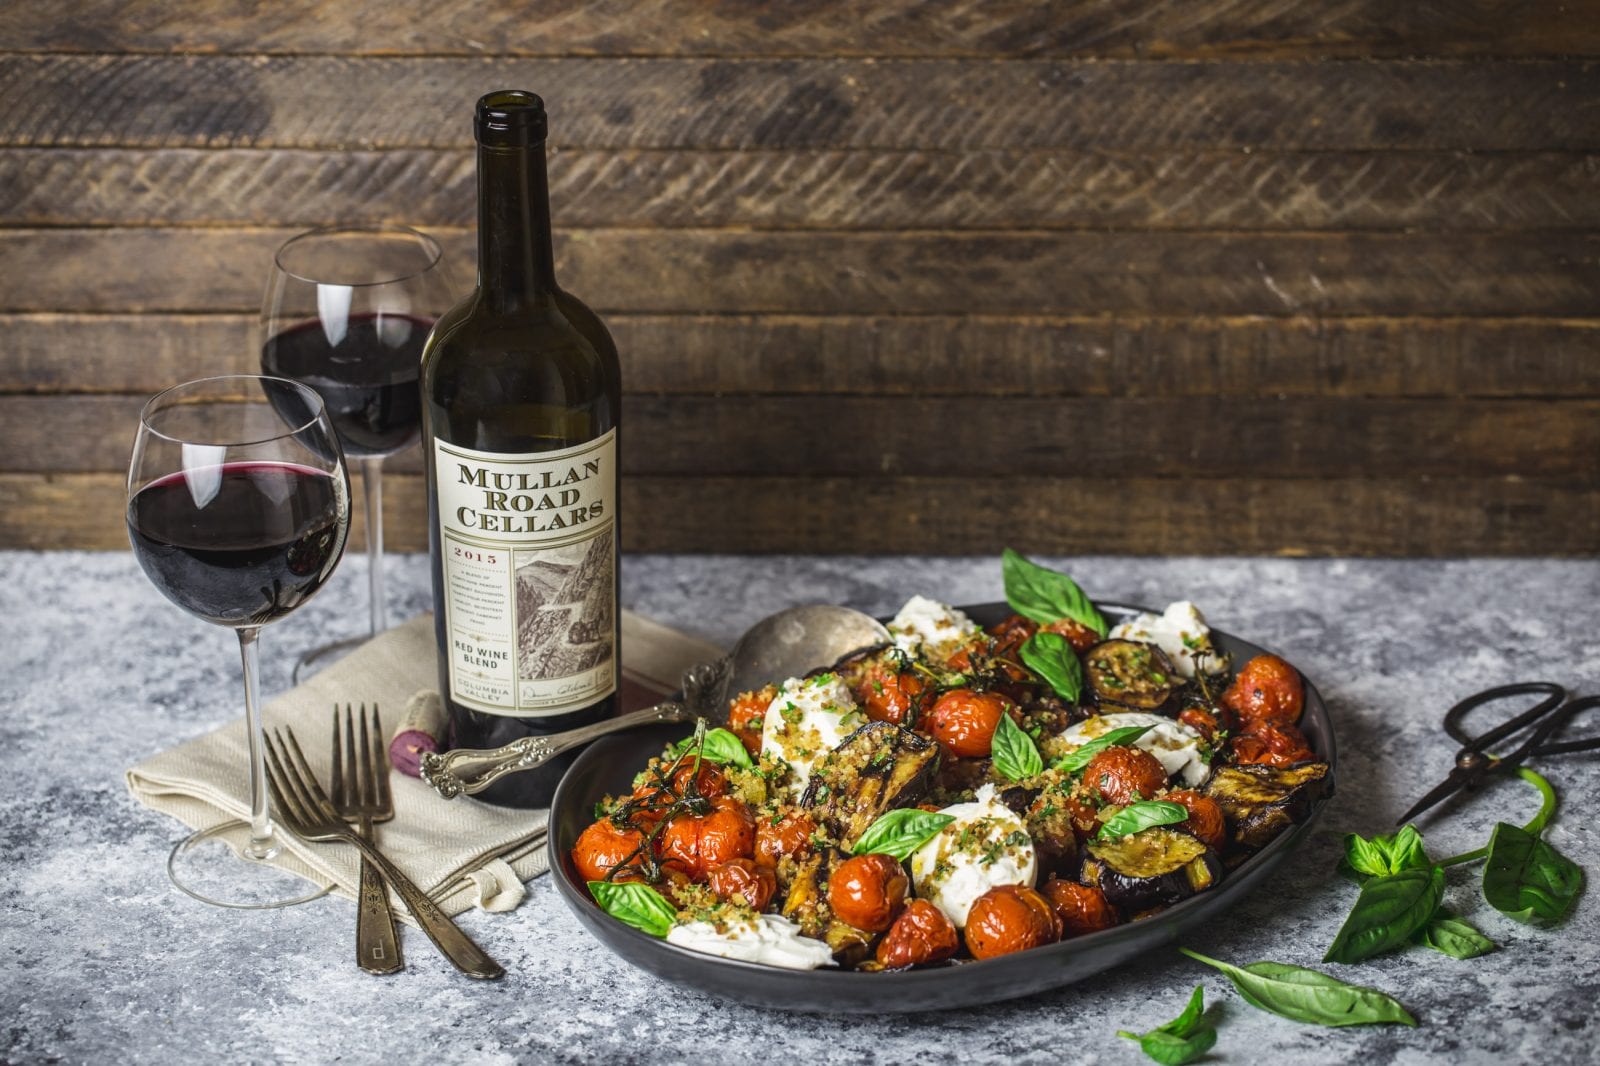 Grilled Eggplant Parmesan with Roasted Tomatoes, Burrata and Garlic Herb Breadcrumbs